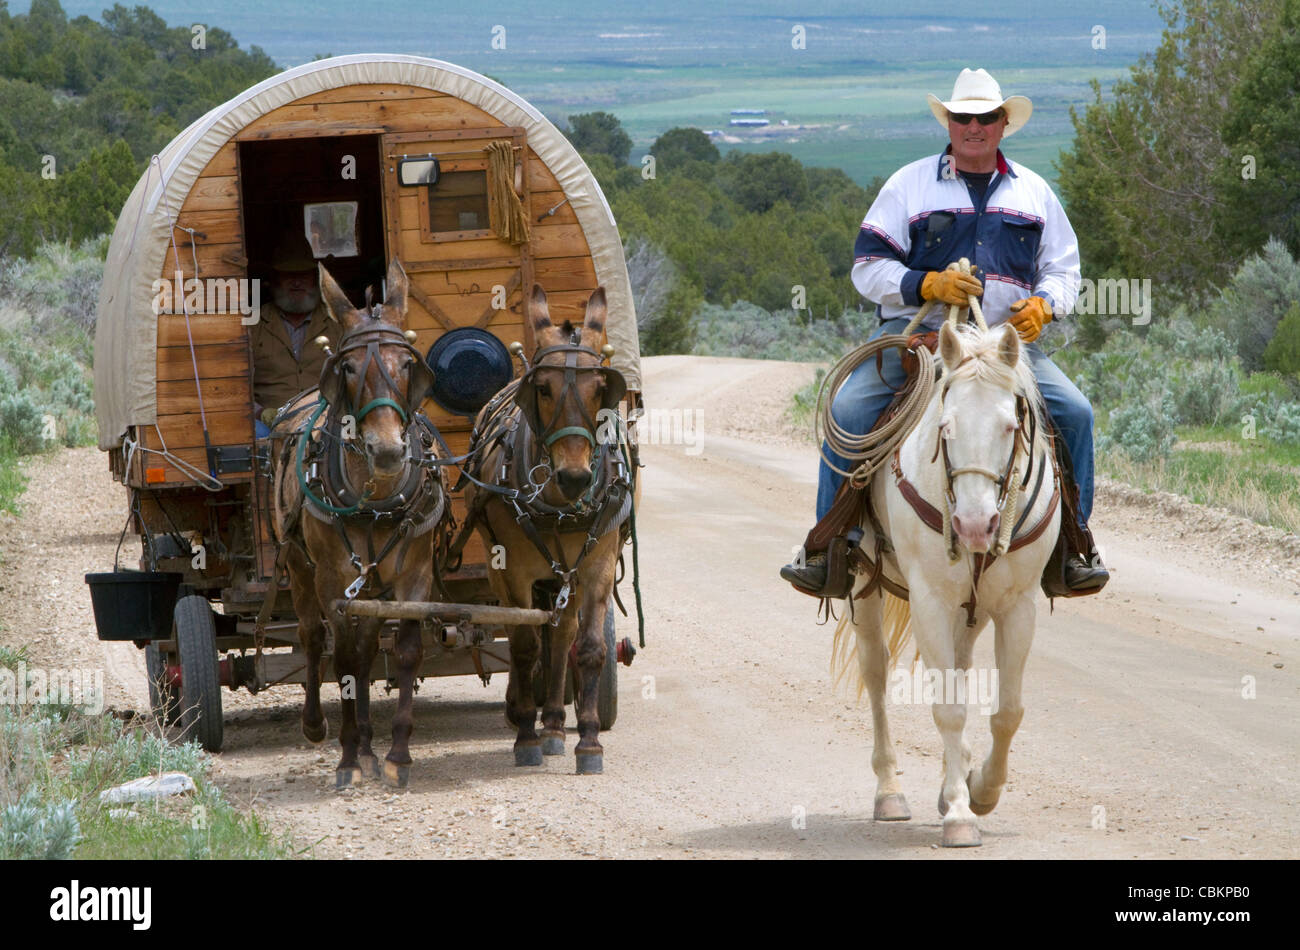 Covered wagon being pulled by mules at the City of Rocks National Reserve and state park in Cassia County, Idaho, USA. Stock Photo